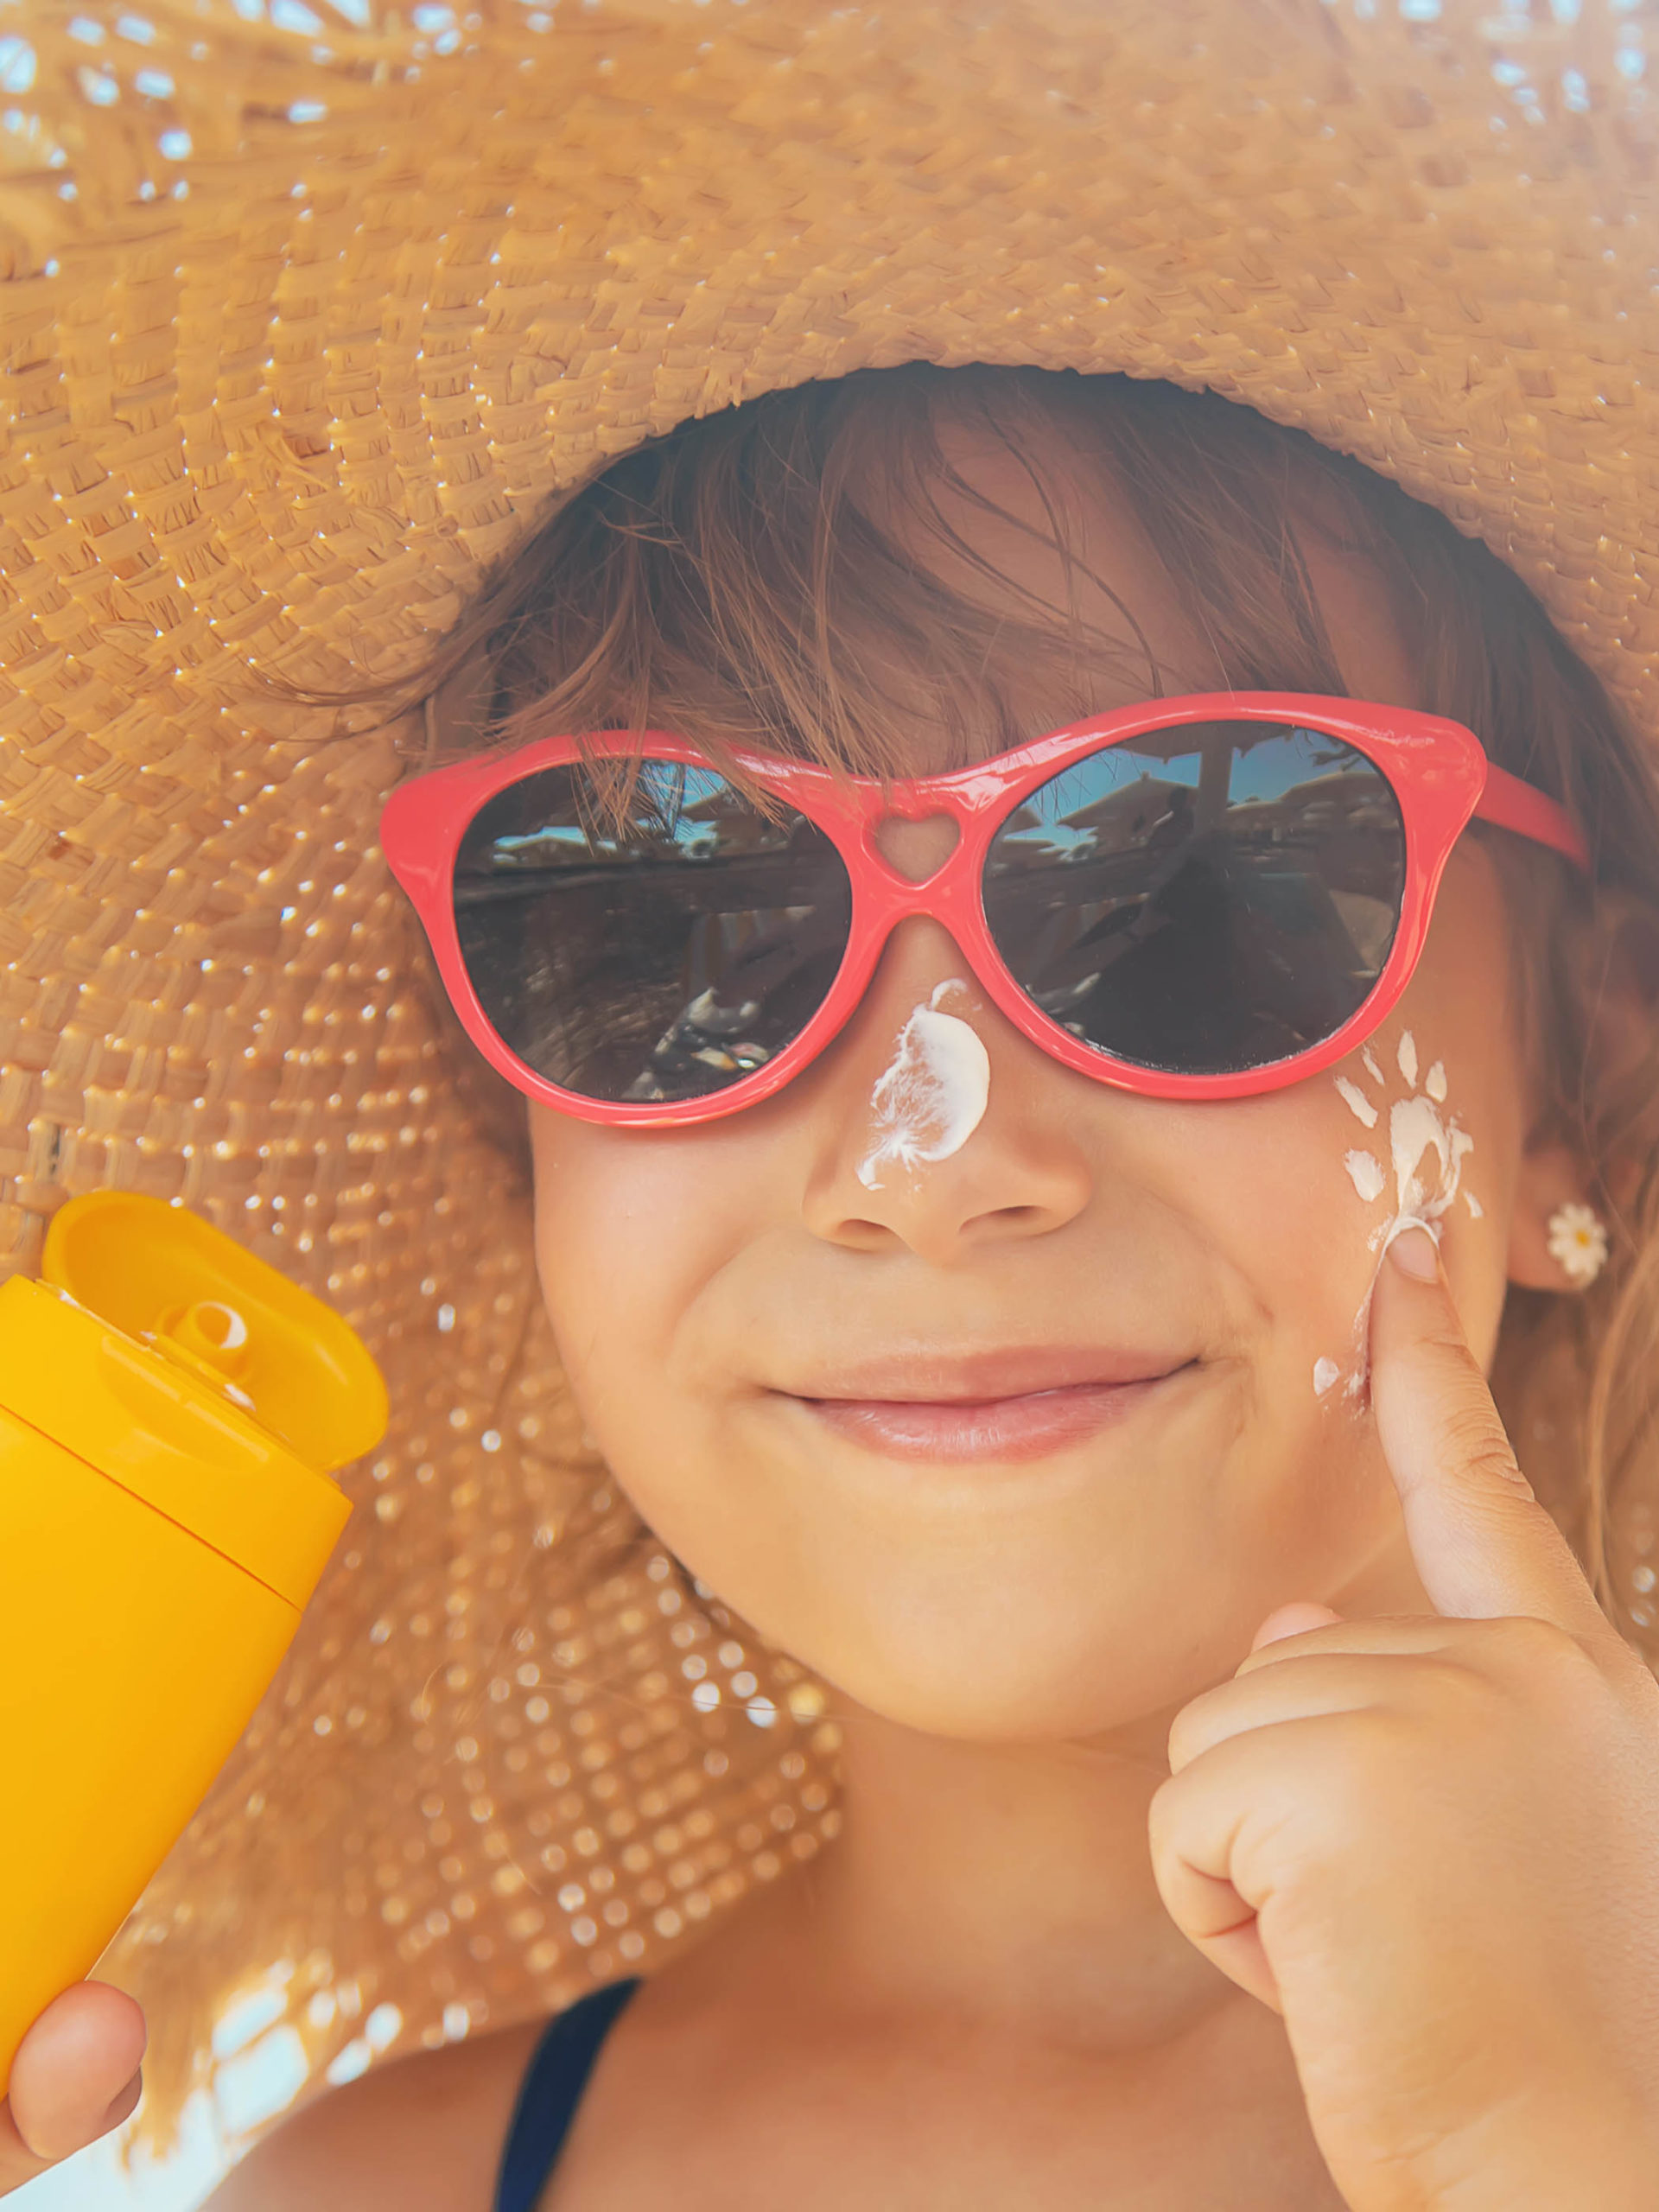 little girl with sunglasses and a hat applying sunscreen to her face